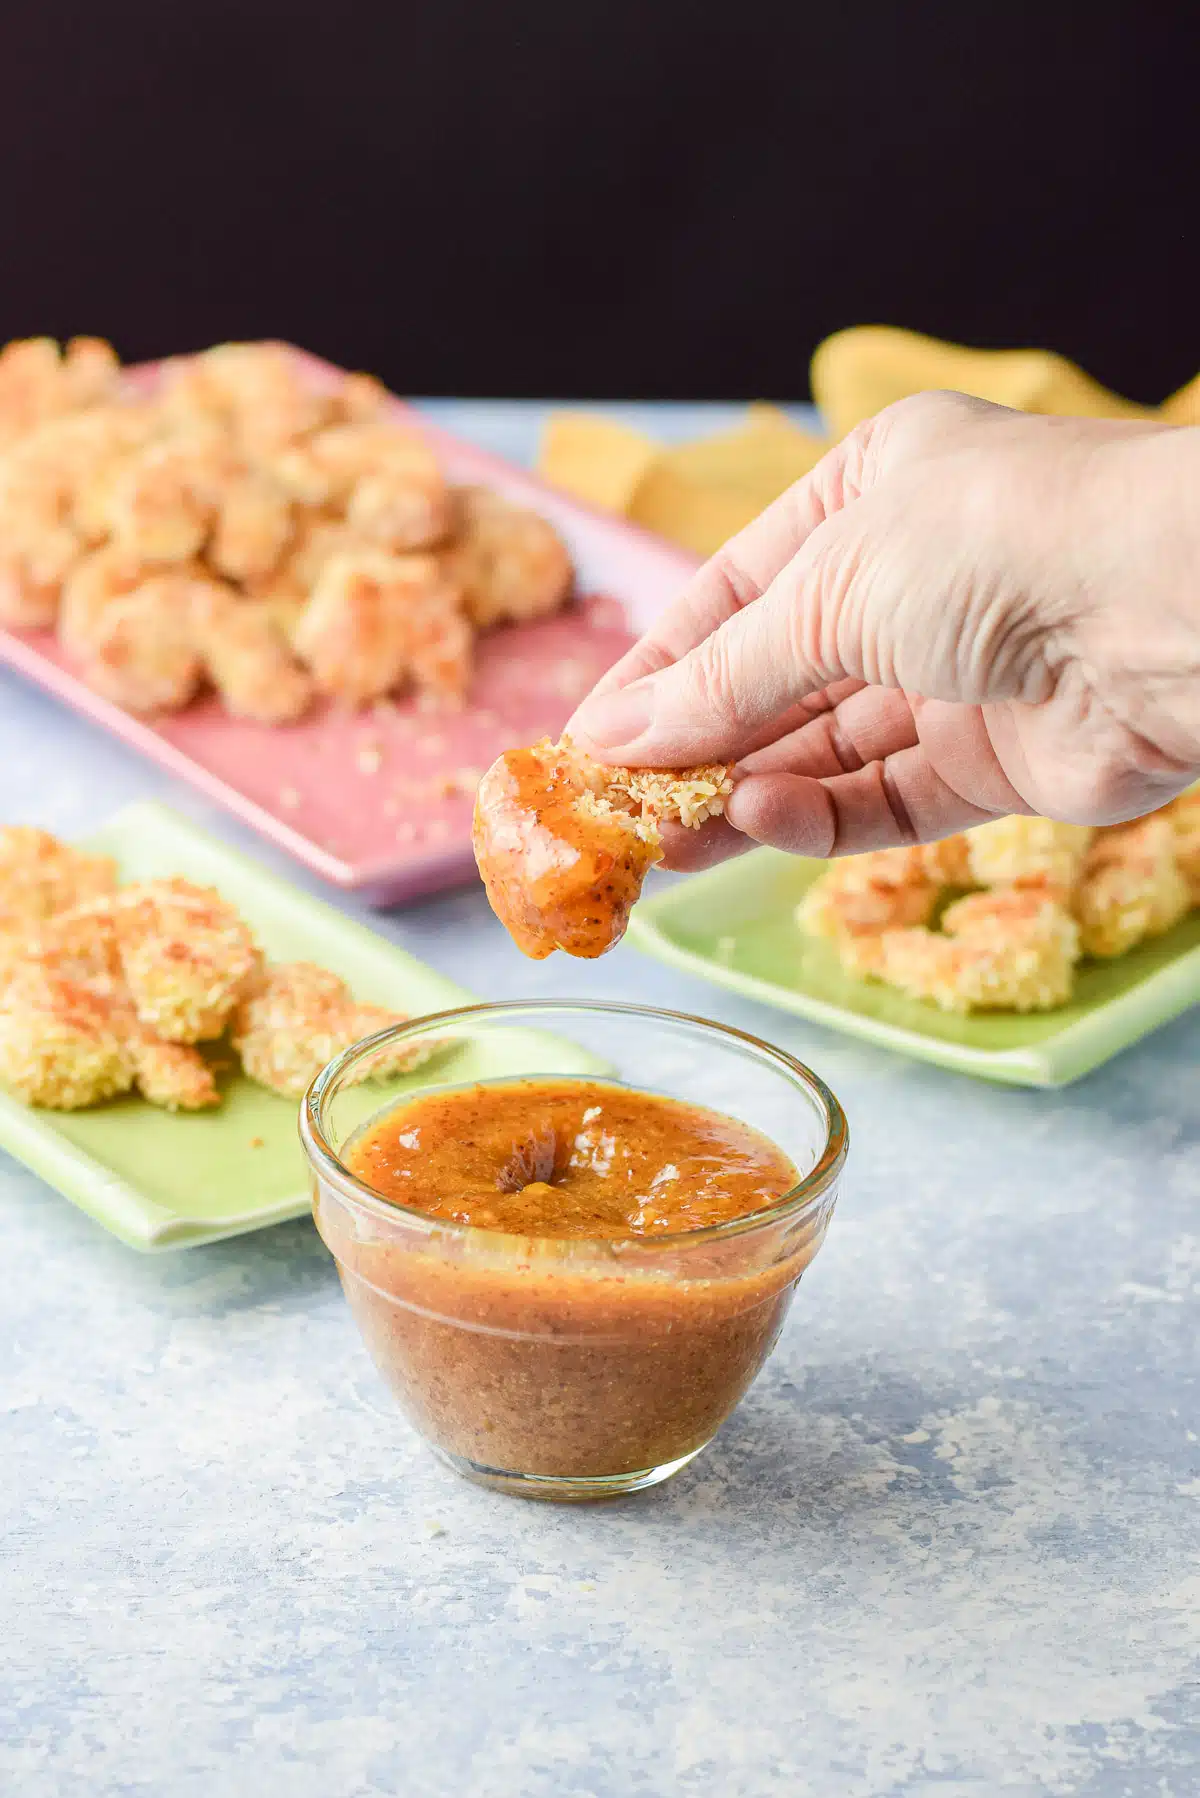 A hand holding a shrimp that has been dipped in the sauce